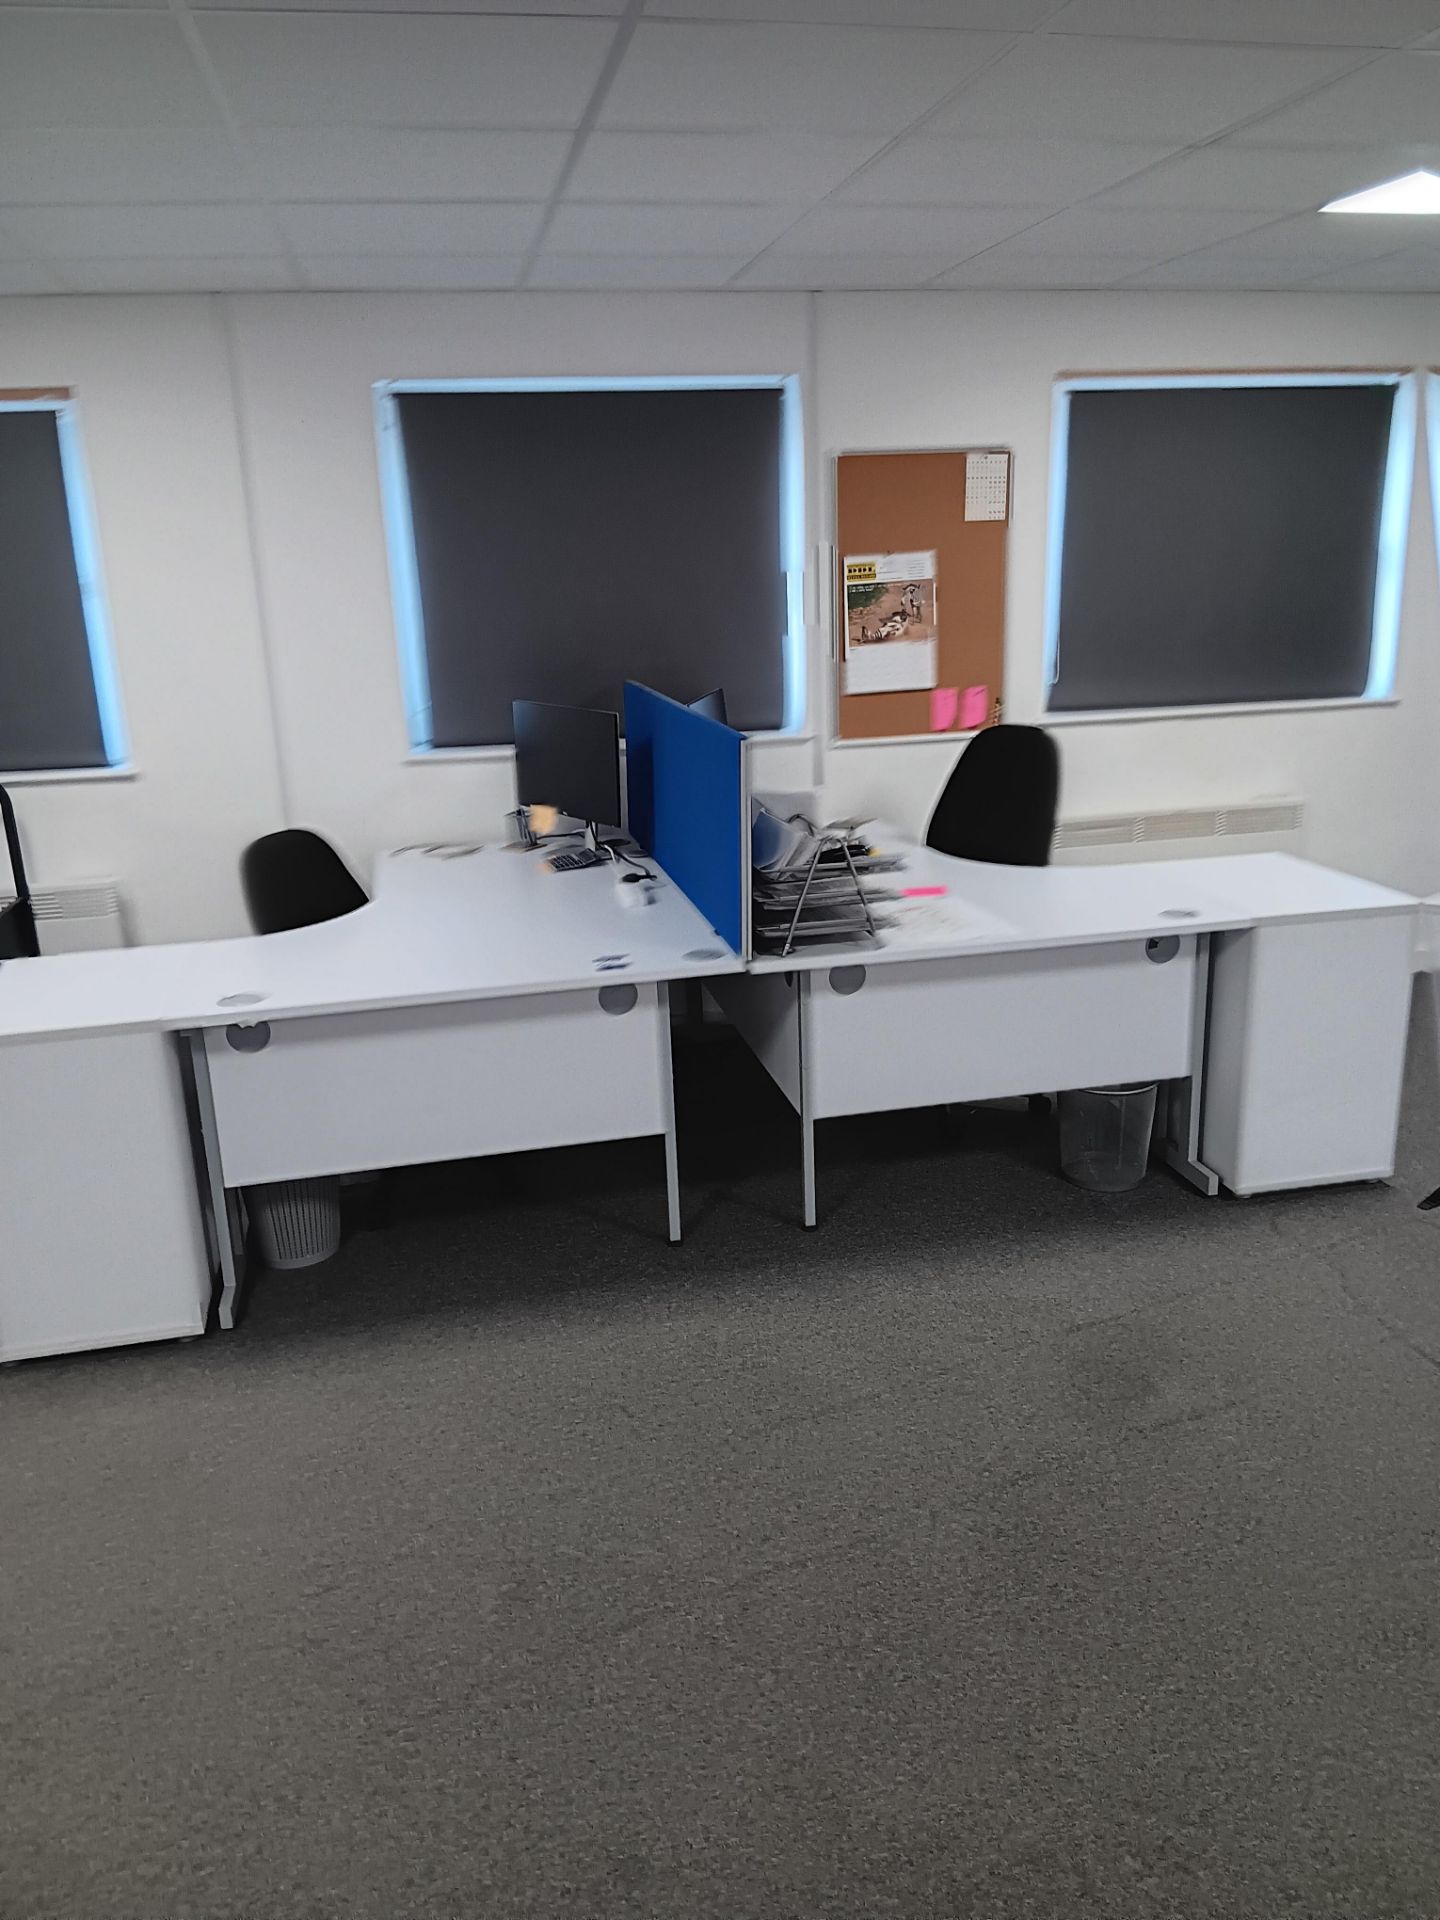 2 Radial workstations, 2 pedestals, divider & 2 swivel chairs (computers not include)